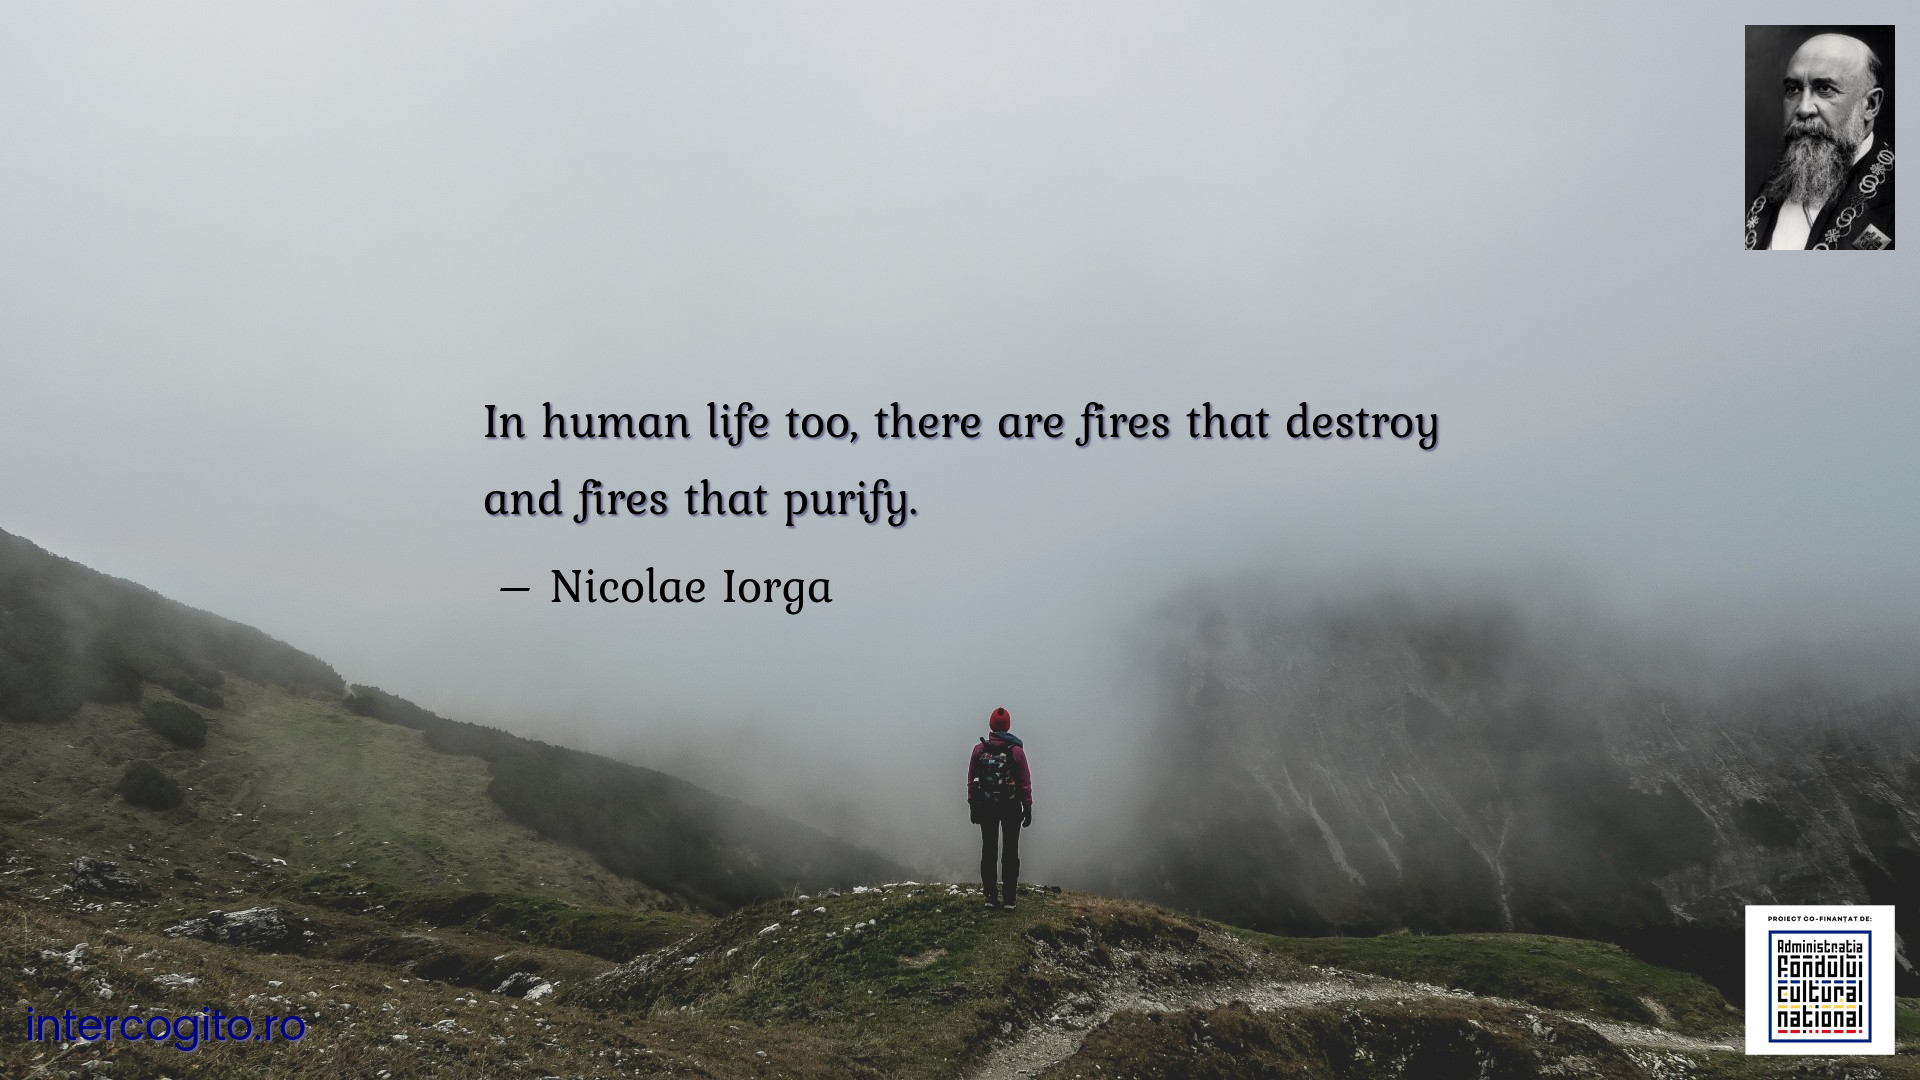 In human life too, there are fires that destroy and fires that purify.